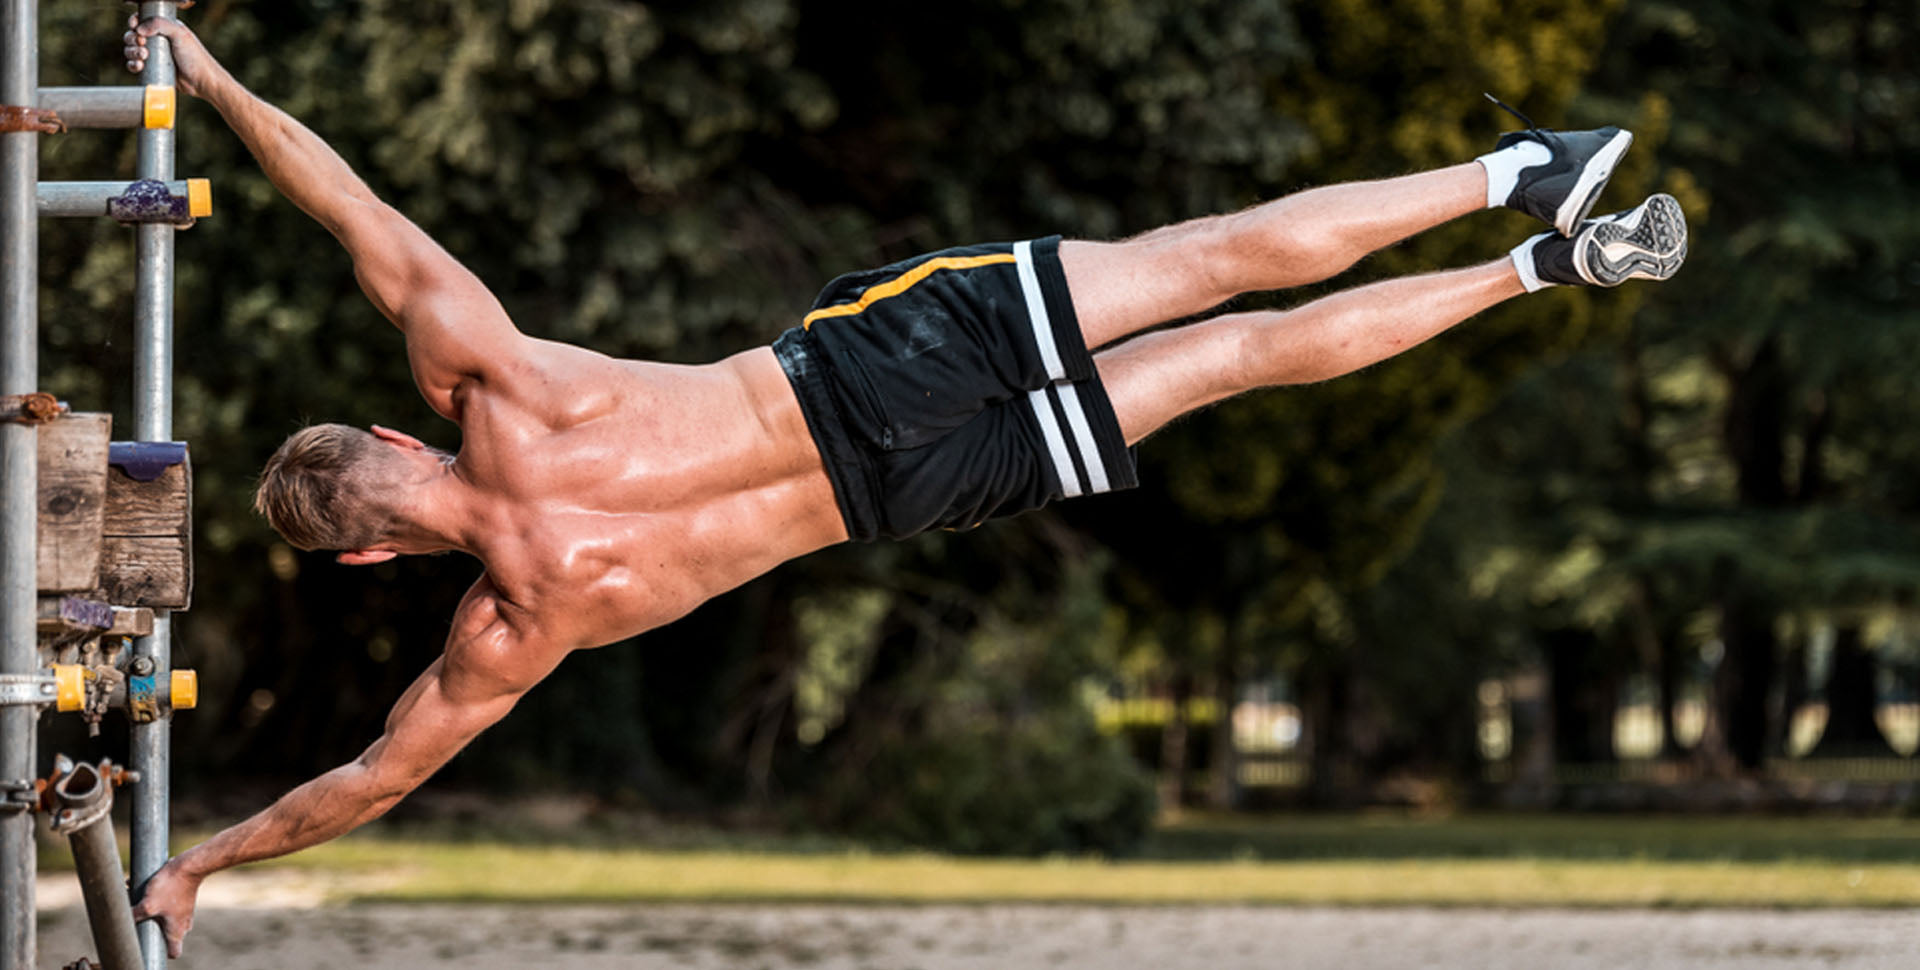 Best Calisthenics Exercises For Building A Muscular Physique